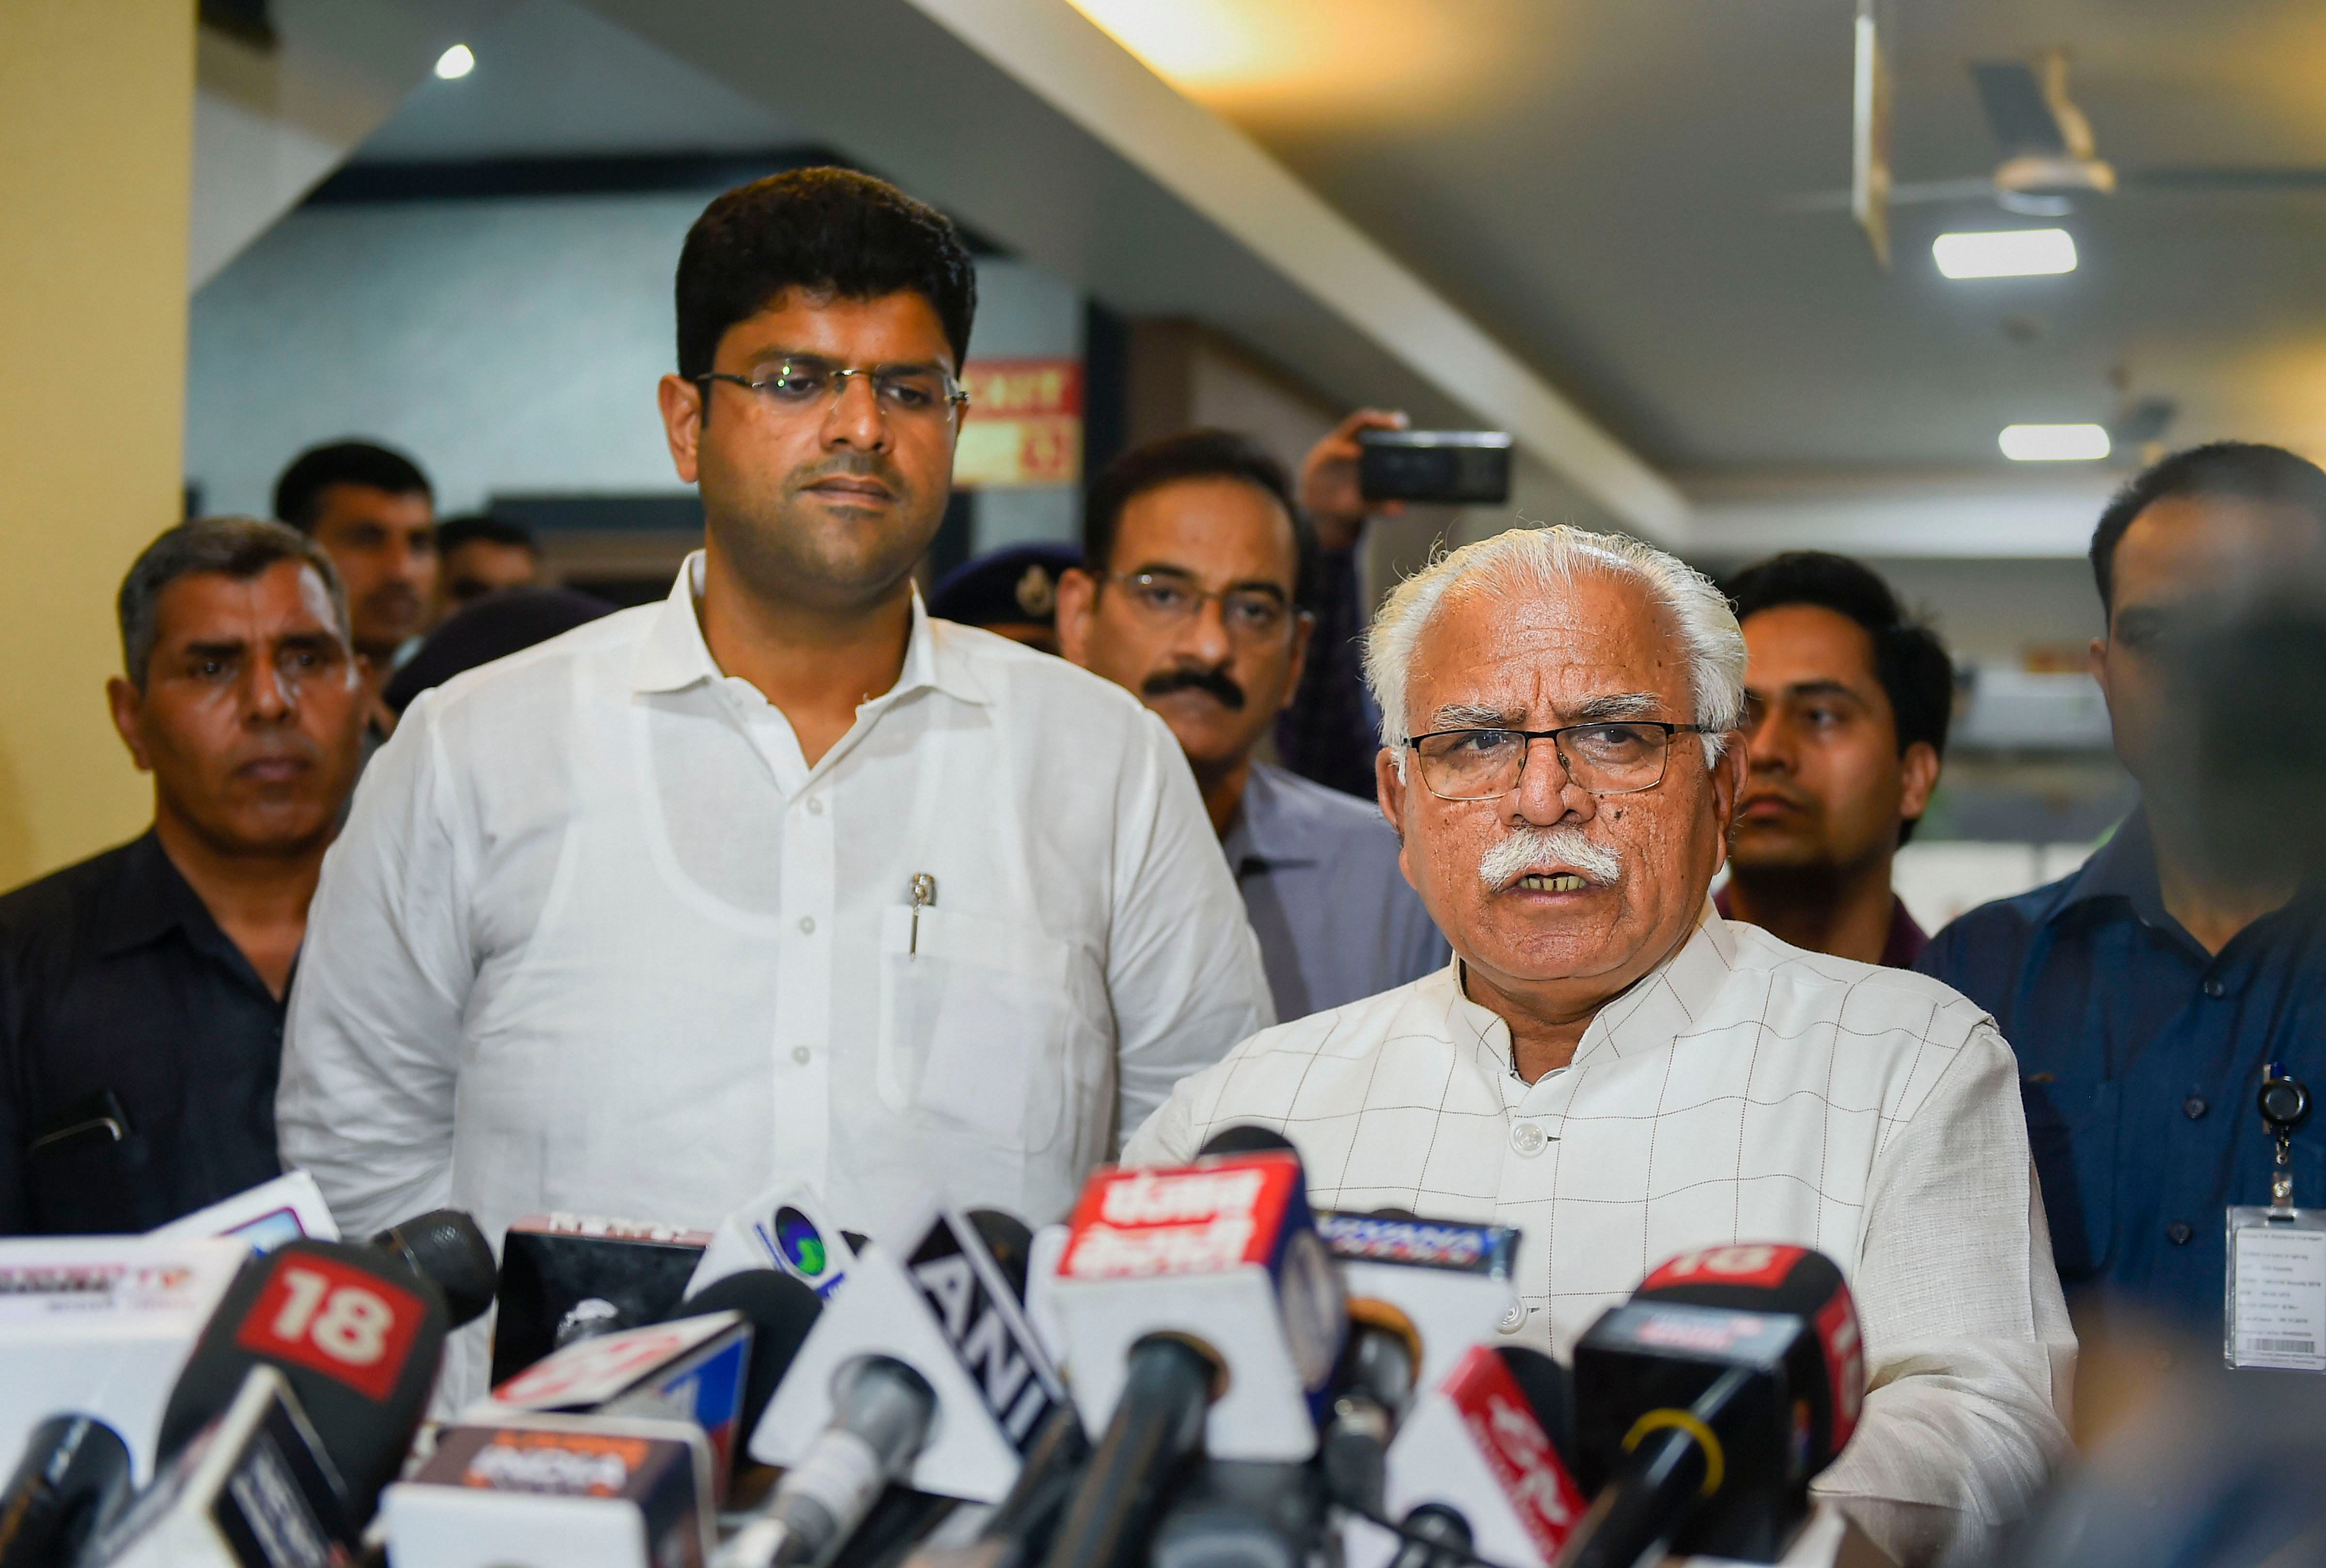 Haryana Chief Minister Manohar Lal Khattar speaks during a press conference after a meeting as Deputy Chief Minister Dushyant Chautala looks on, at Haryana Bhawan in New Delhi. (PTI Photo)